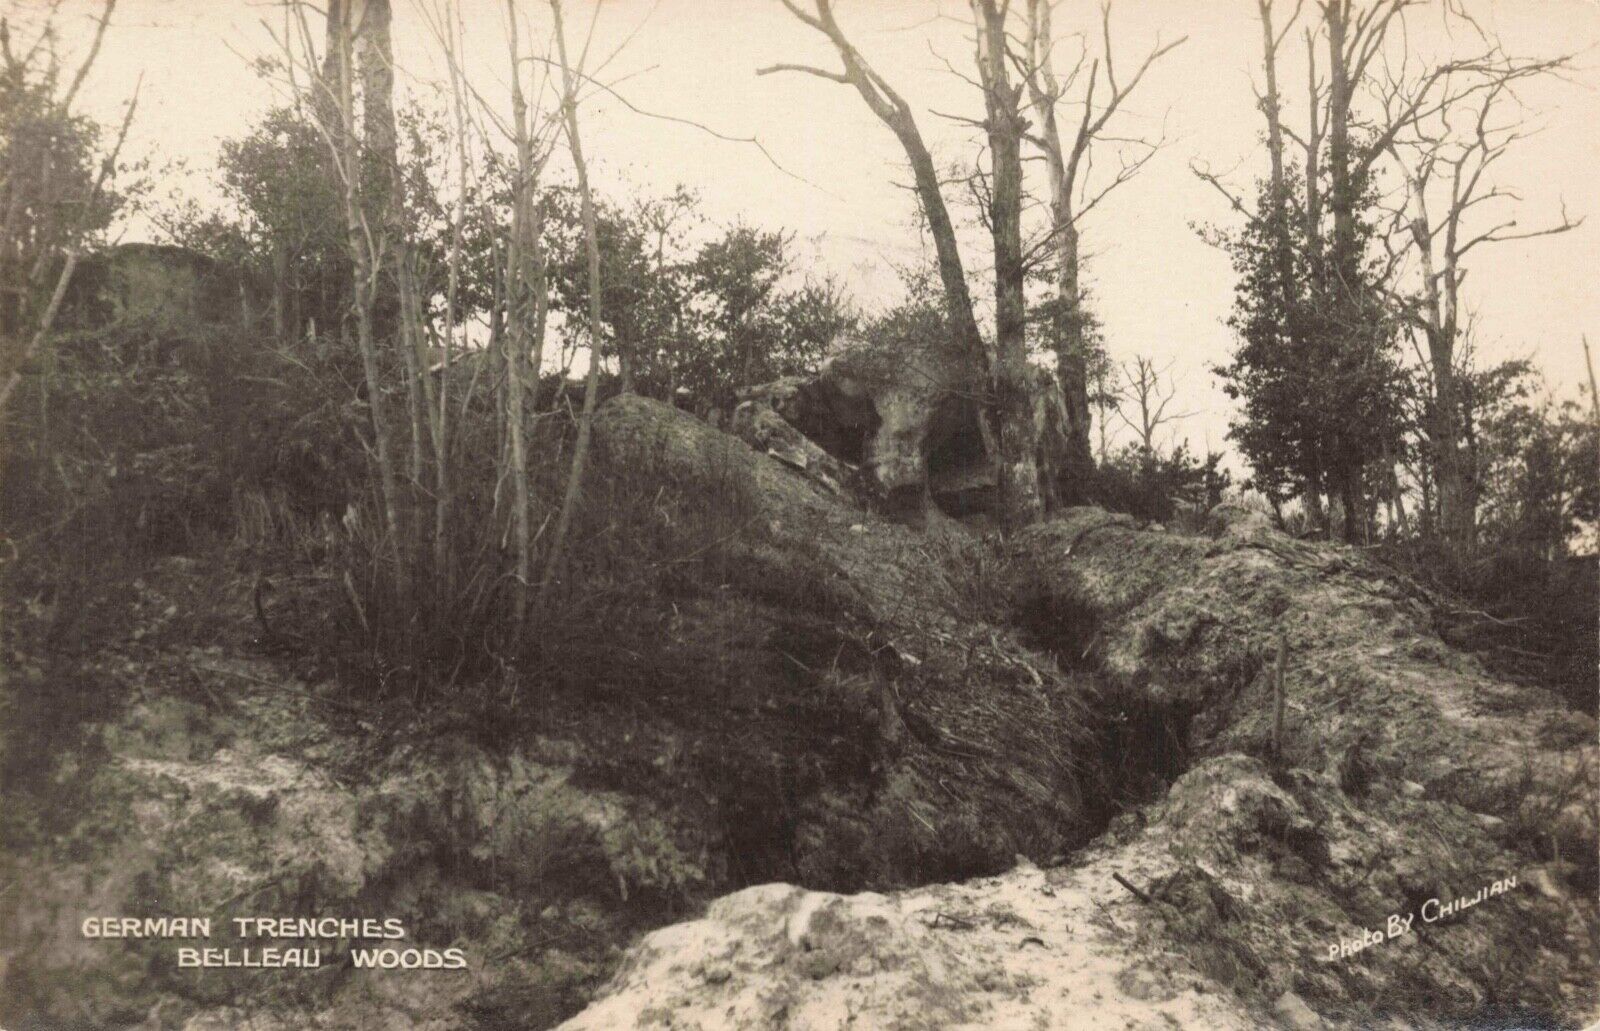 German Trenches, Belleau Woods France WWI Vintage PC RPPC Photo by Chiljian